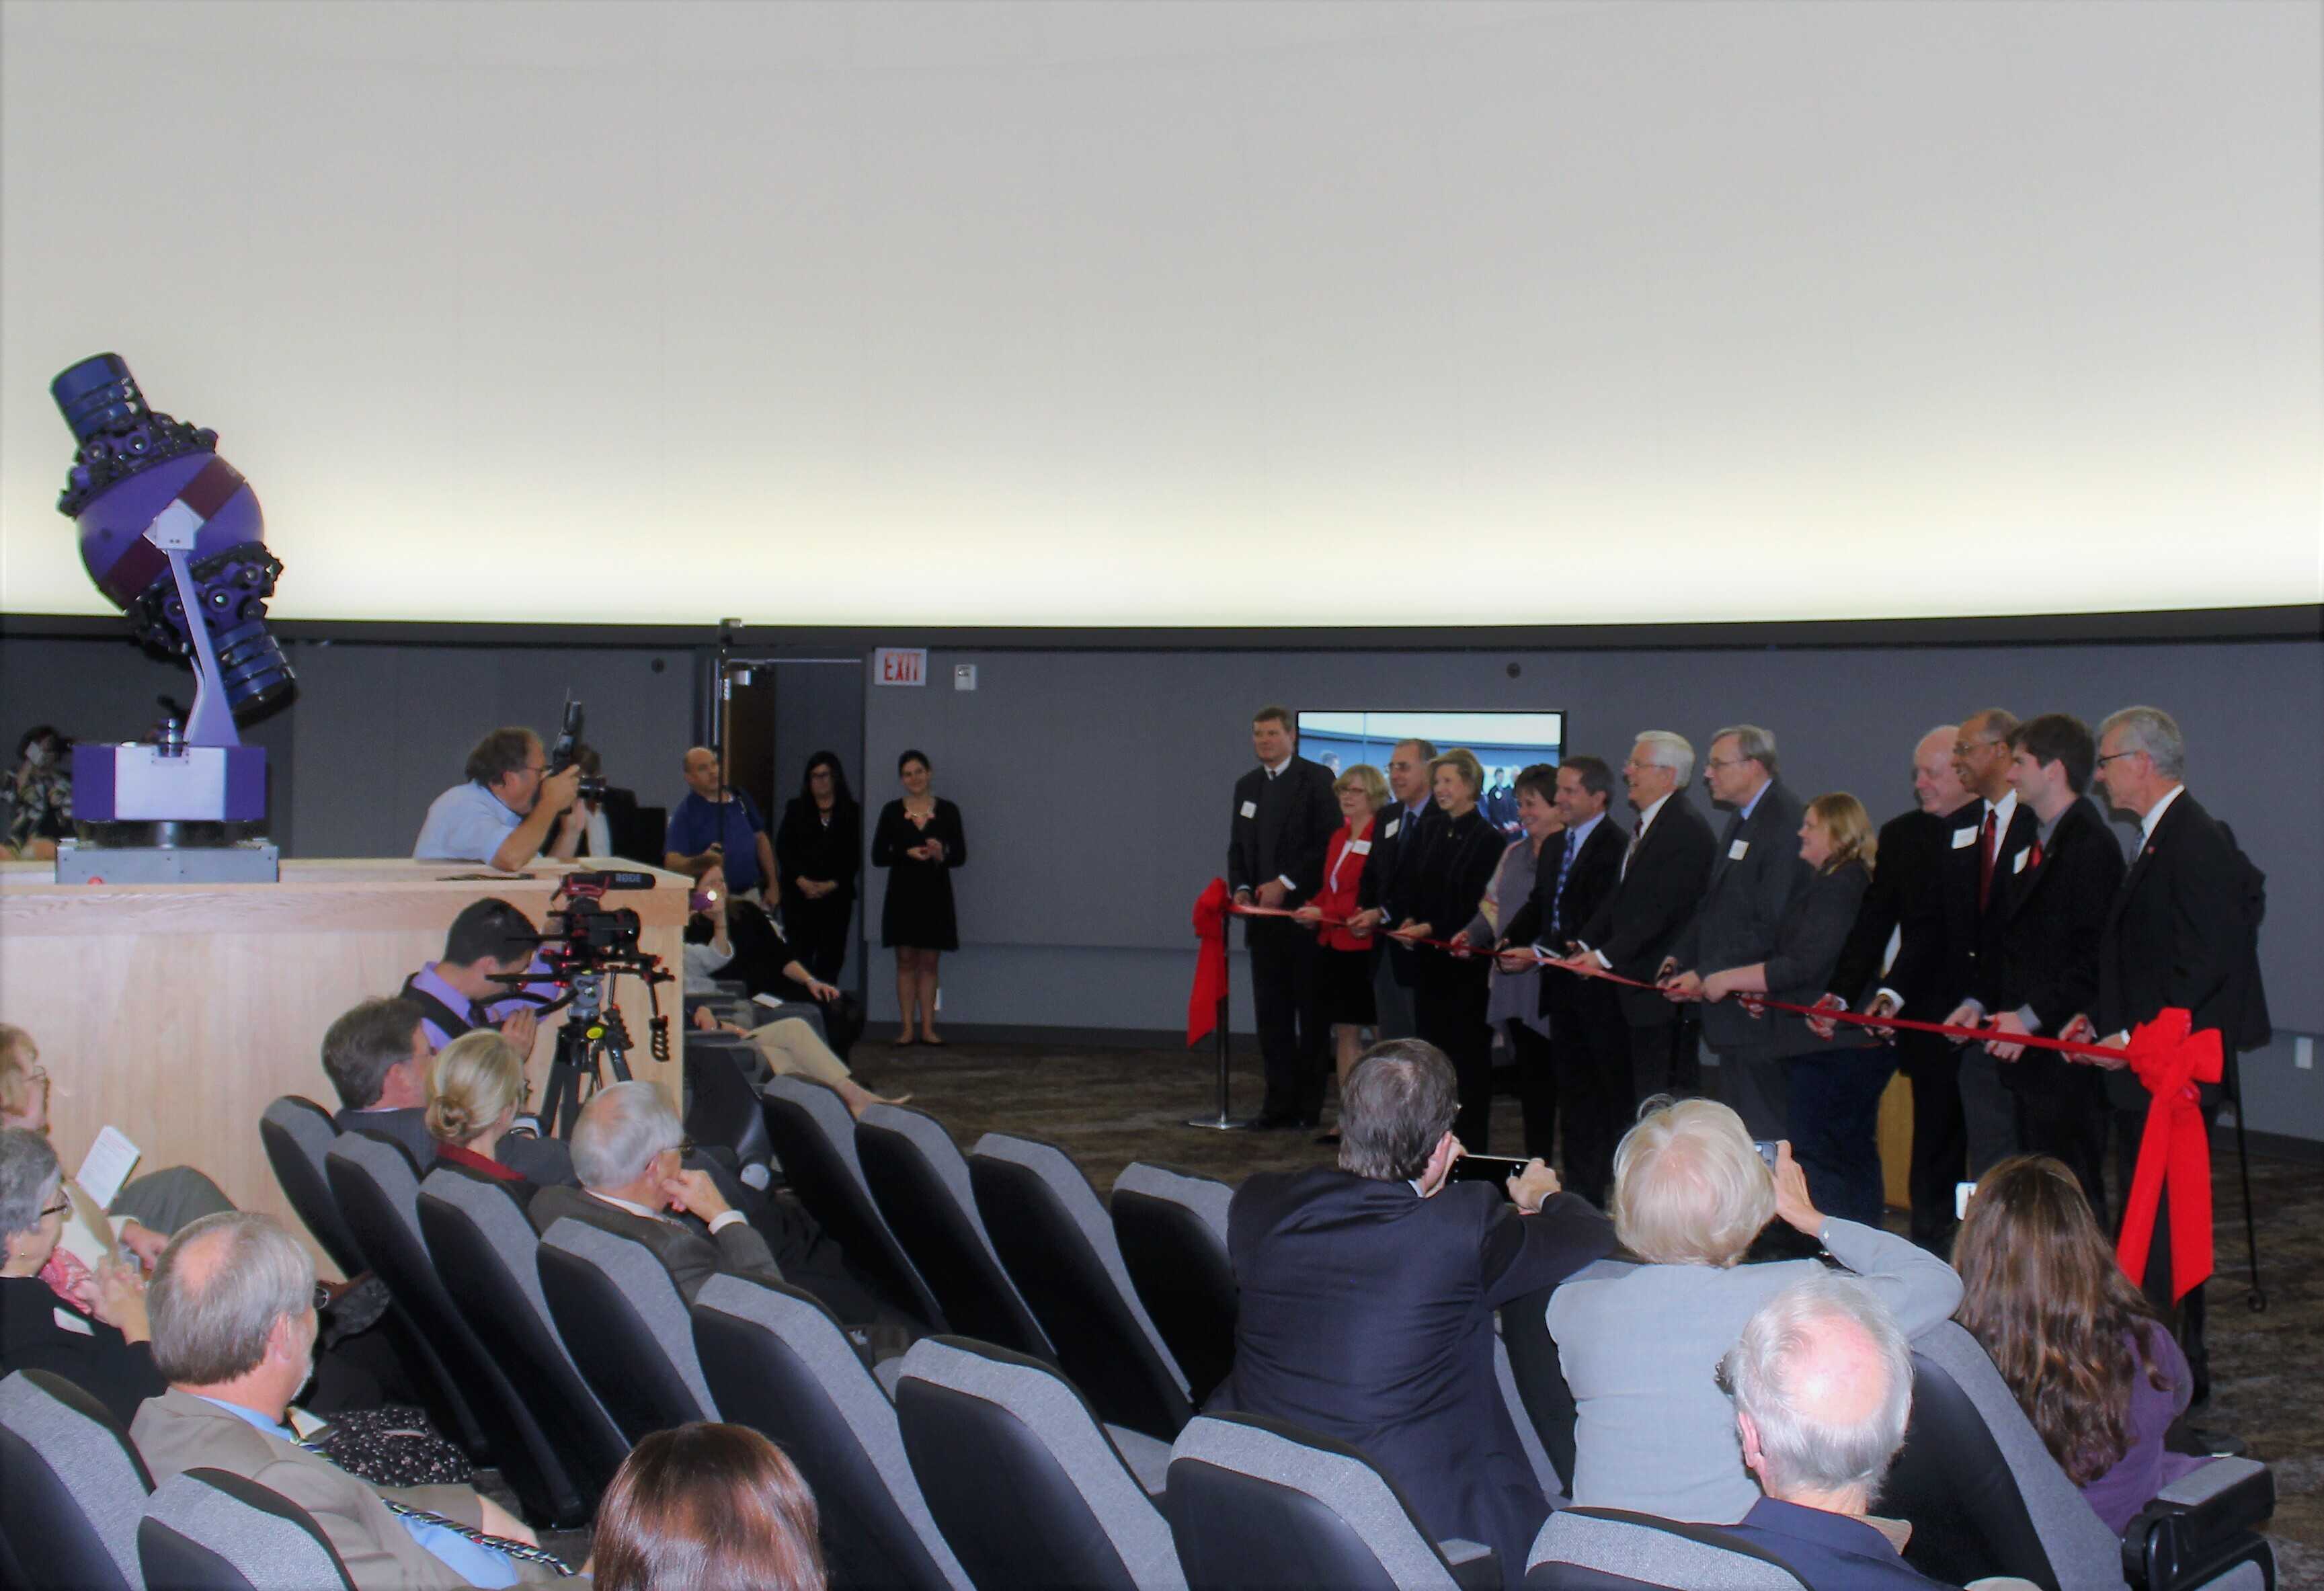 Ribbon cutting for the Brown Planetarium on October 22, 2014.